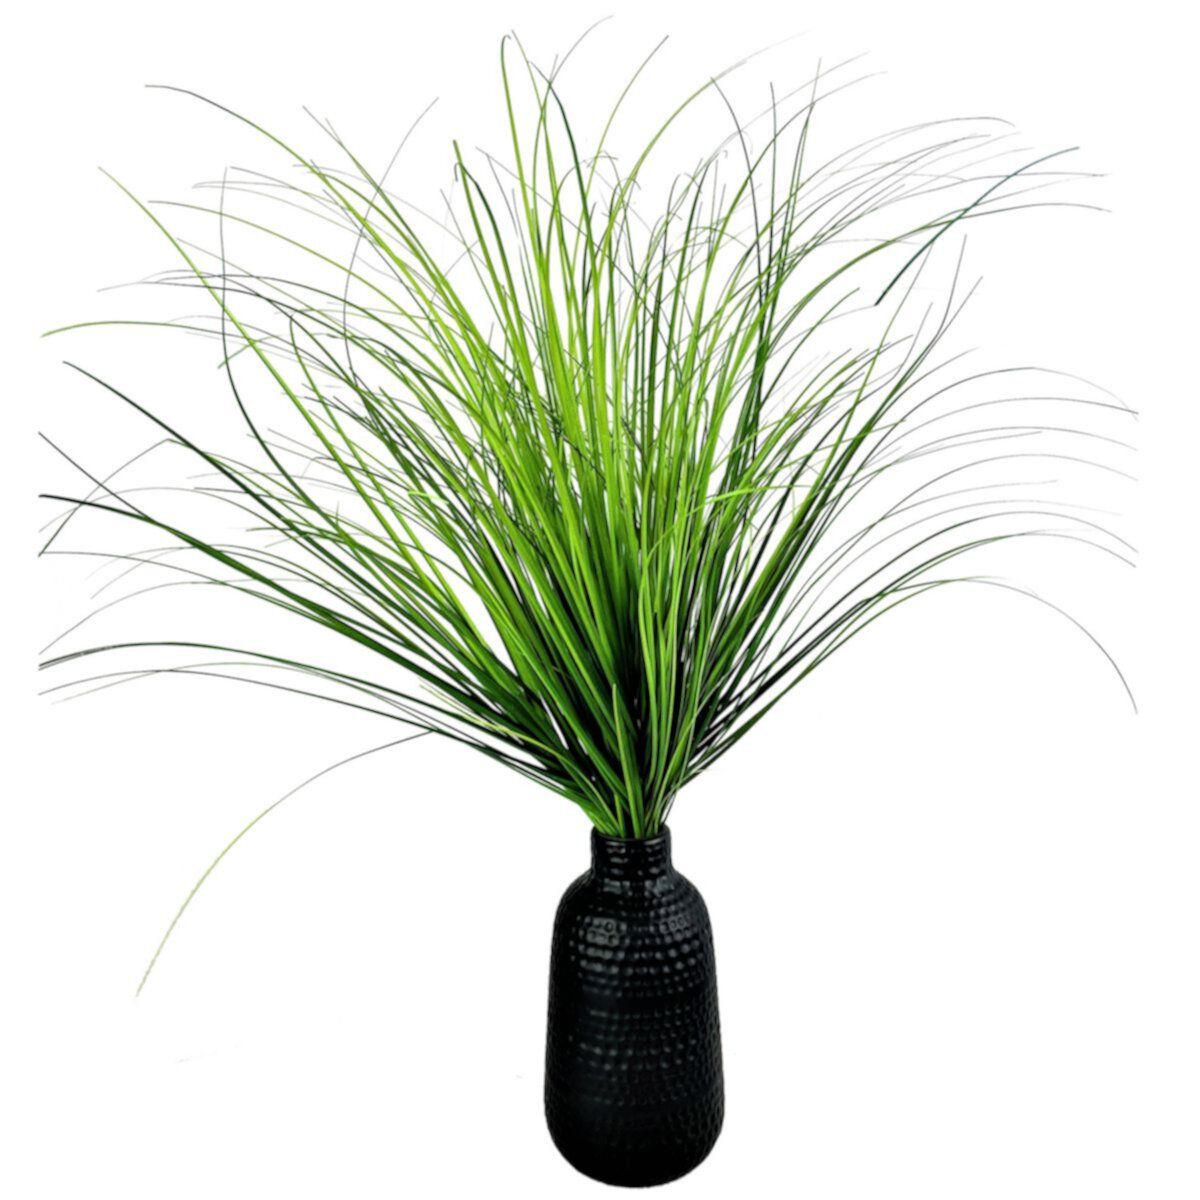 Artificial Grass Black Embossed Vase Table Decor Unbranded